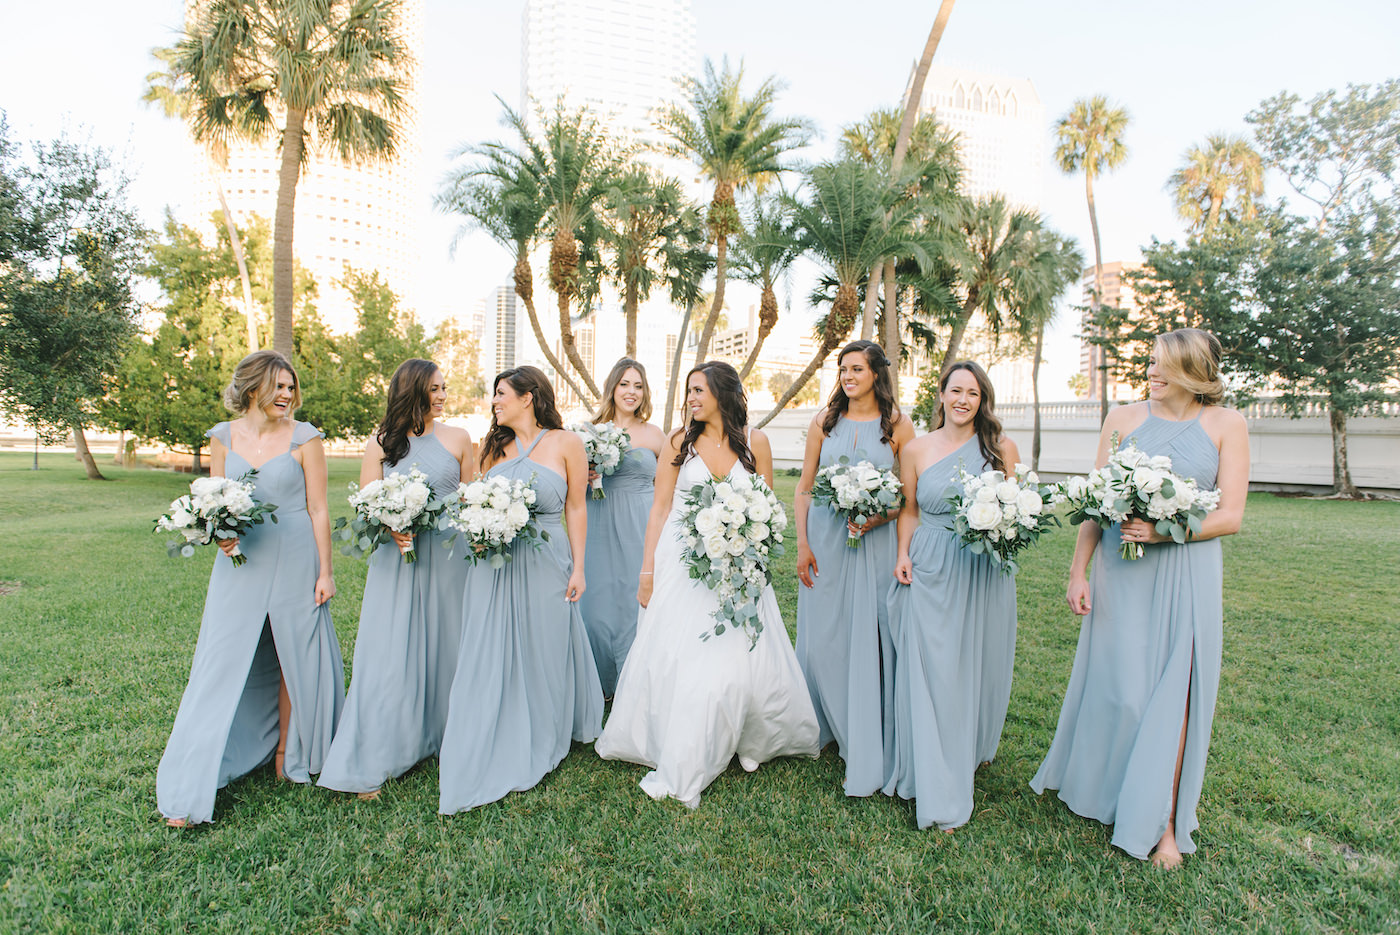 Classic Elegant Florida Bride in A-Line V Neck Wedding Dress with Lush White Roses and Greenery Floral Bouquet, Bridesmaids in Mix and Match Dusty Blue Dresses | Tampa Bay Wedding Photographer Kera Photography